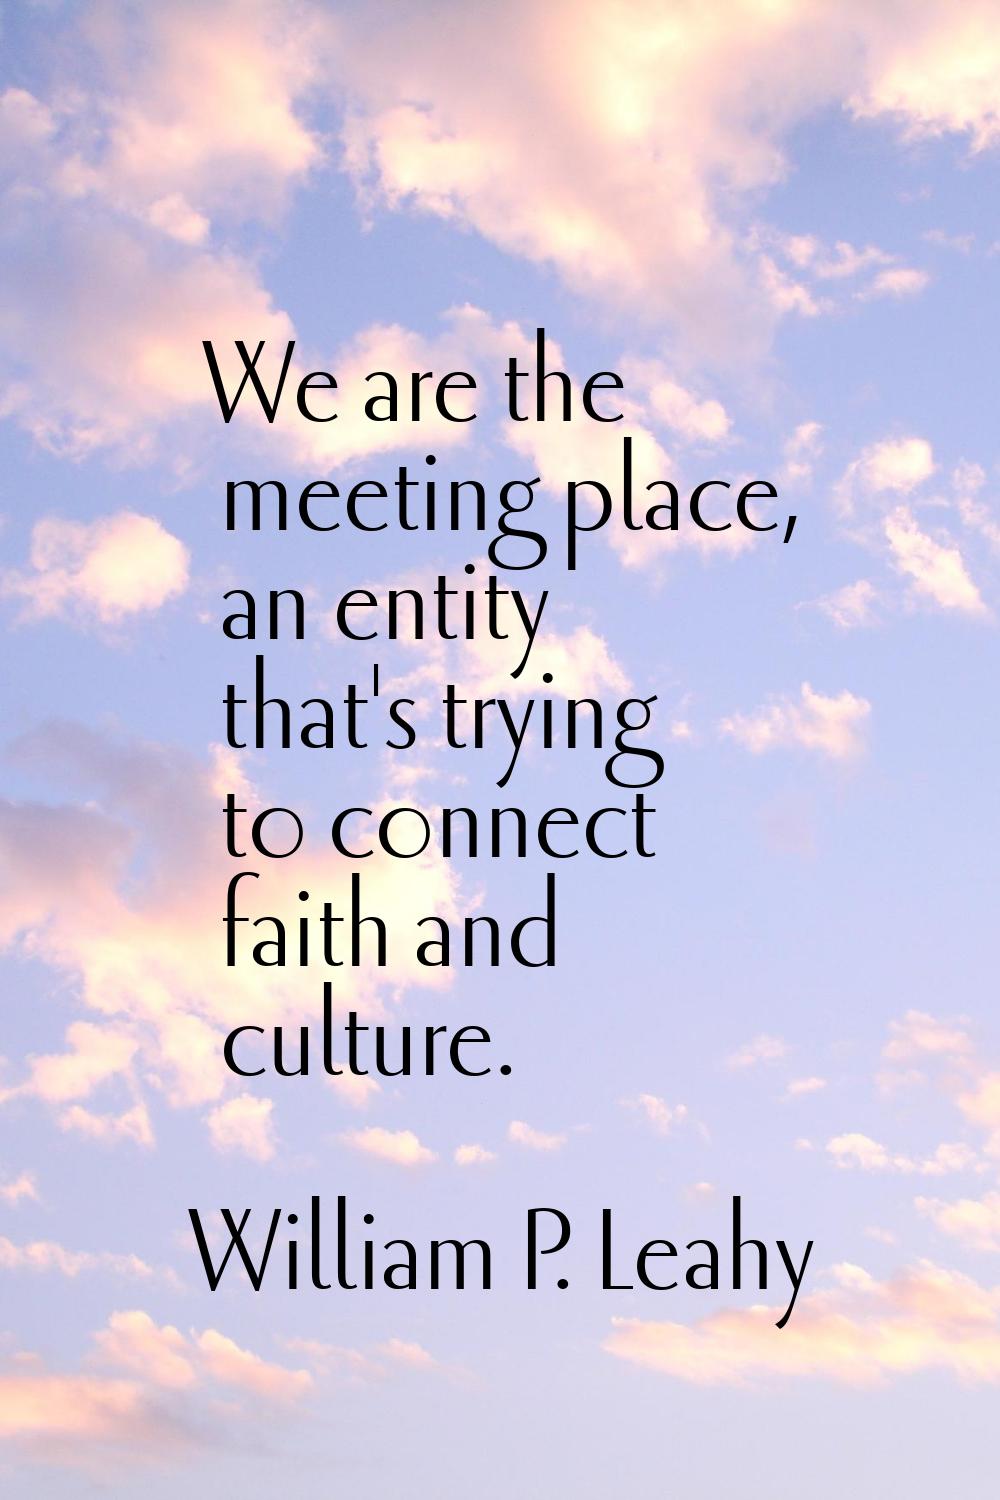 We are the meeting place, an entity that's trying to connect faith and culture.